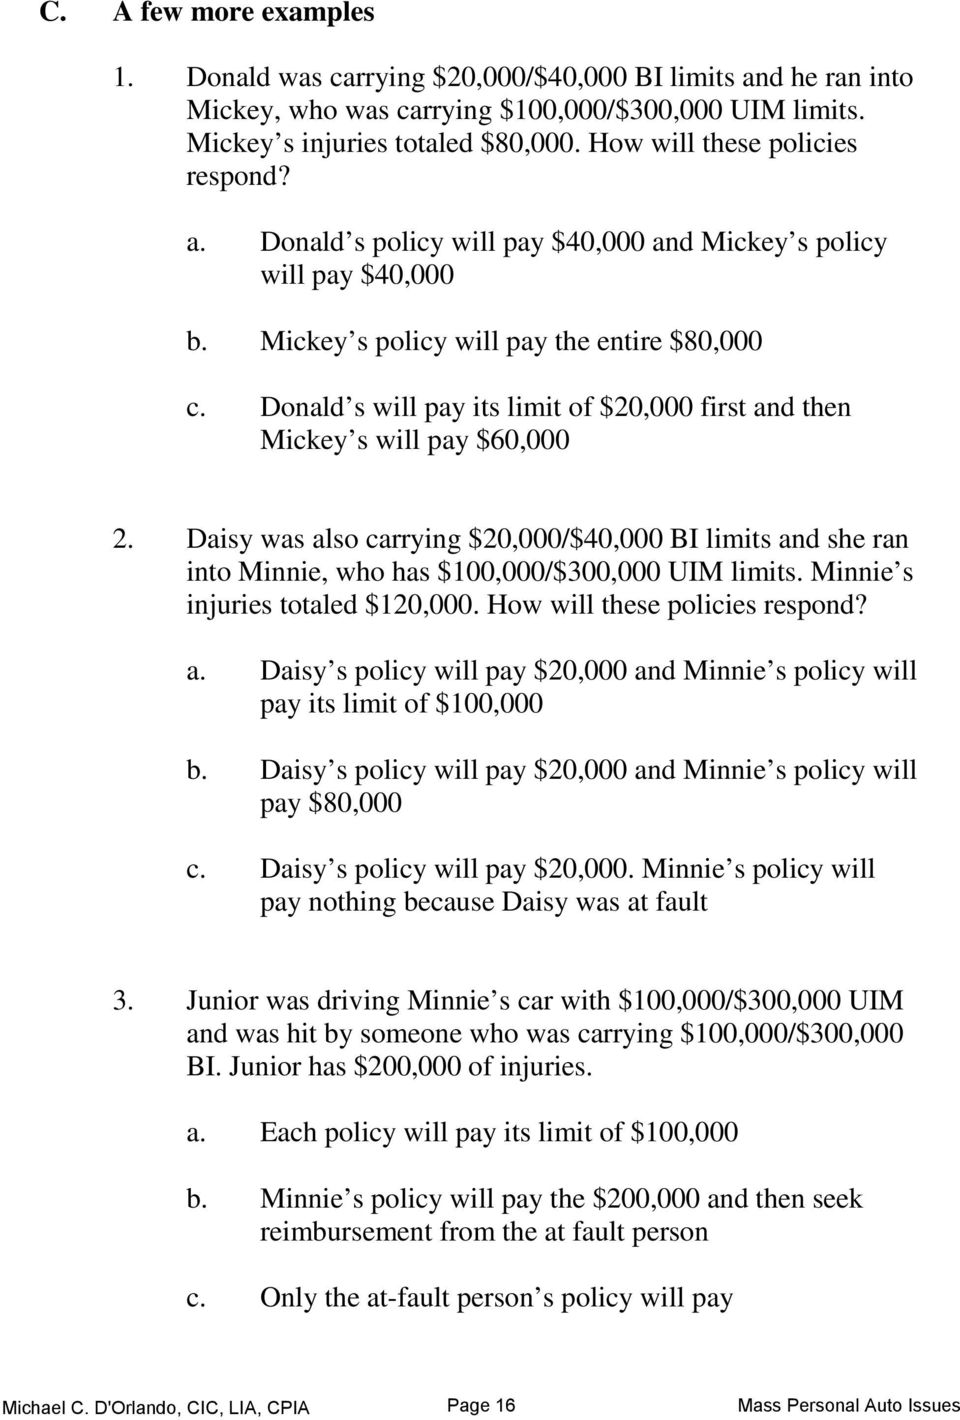 Donald s will pay its limit of $20,000 first and then Mickey s will pay $60,000 2. Daisy was also carrying $20,000/$40,000 BI limits and she ran into Minnie, who has $100,000/$300,000 UIM limits.